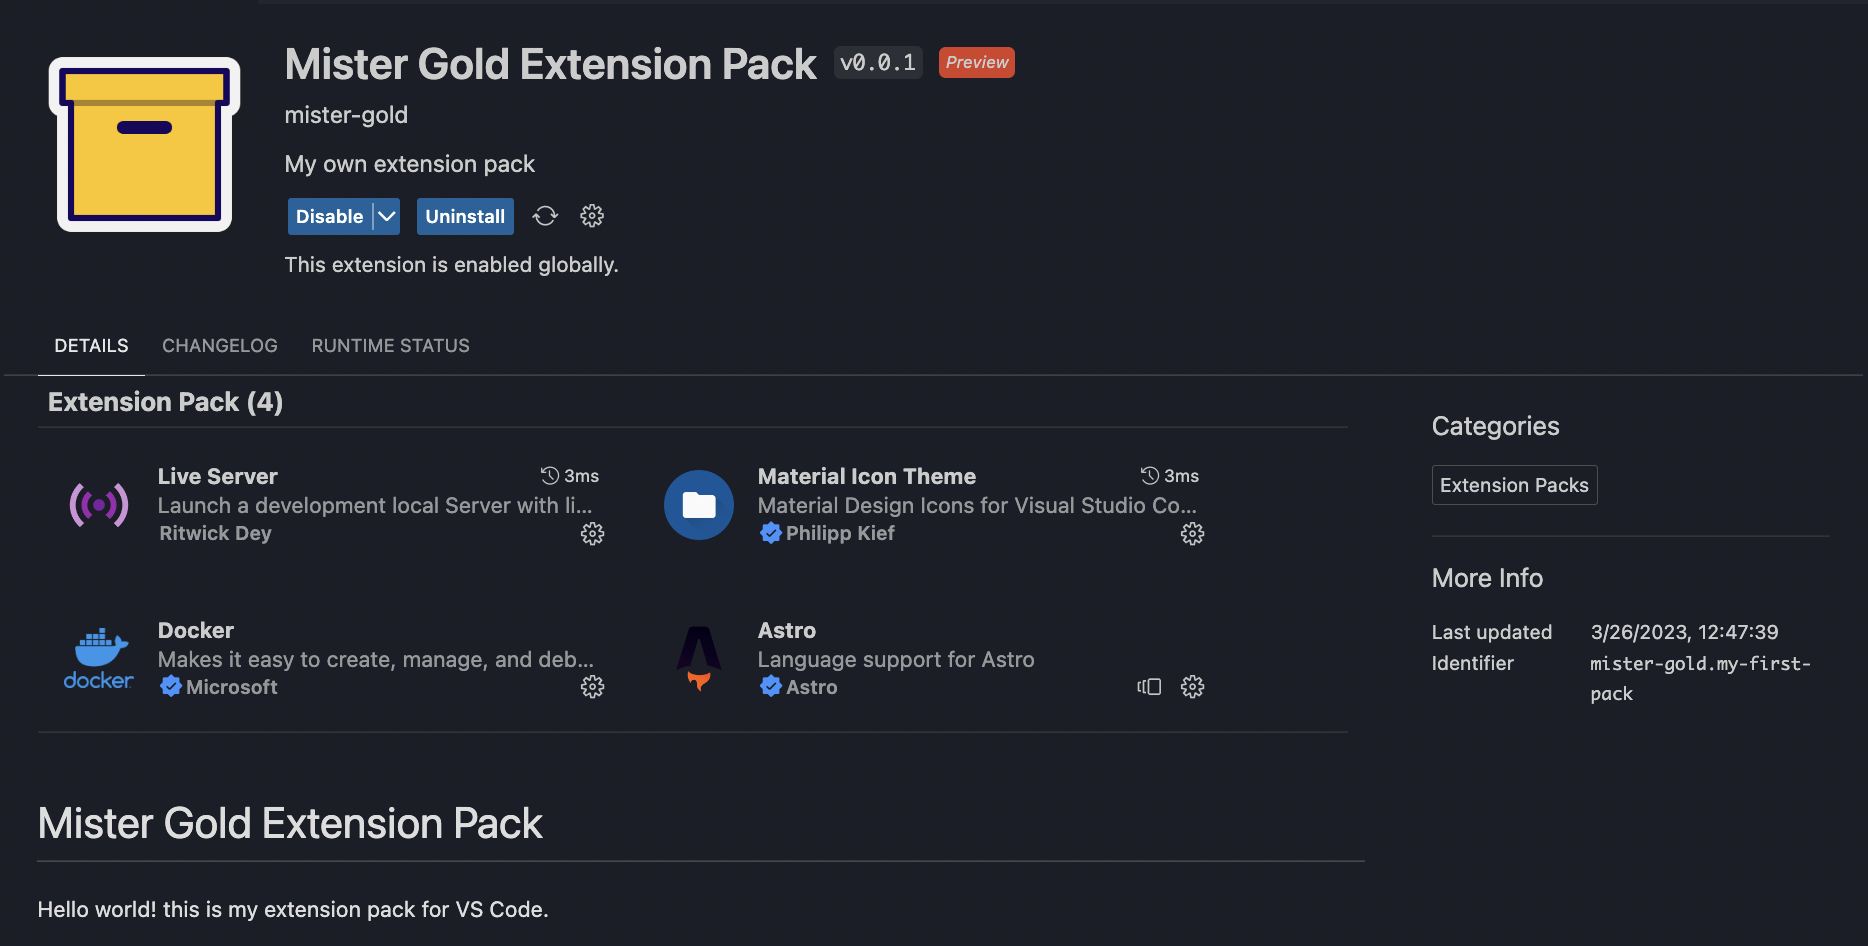 VS Code extension pack